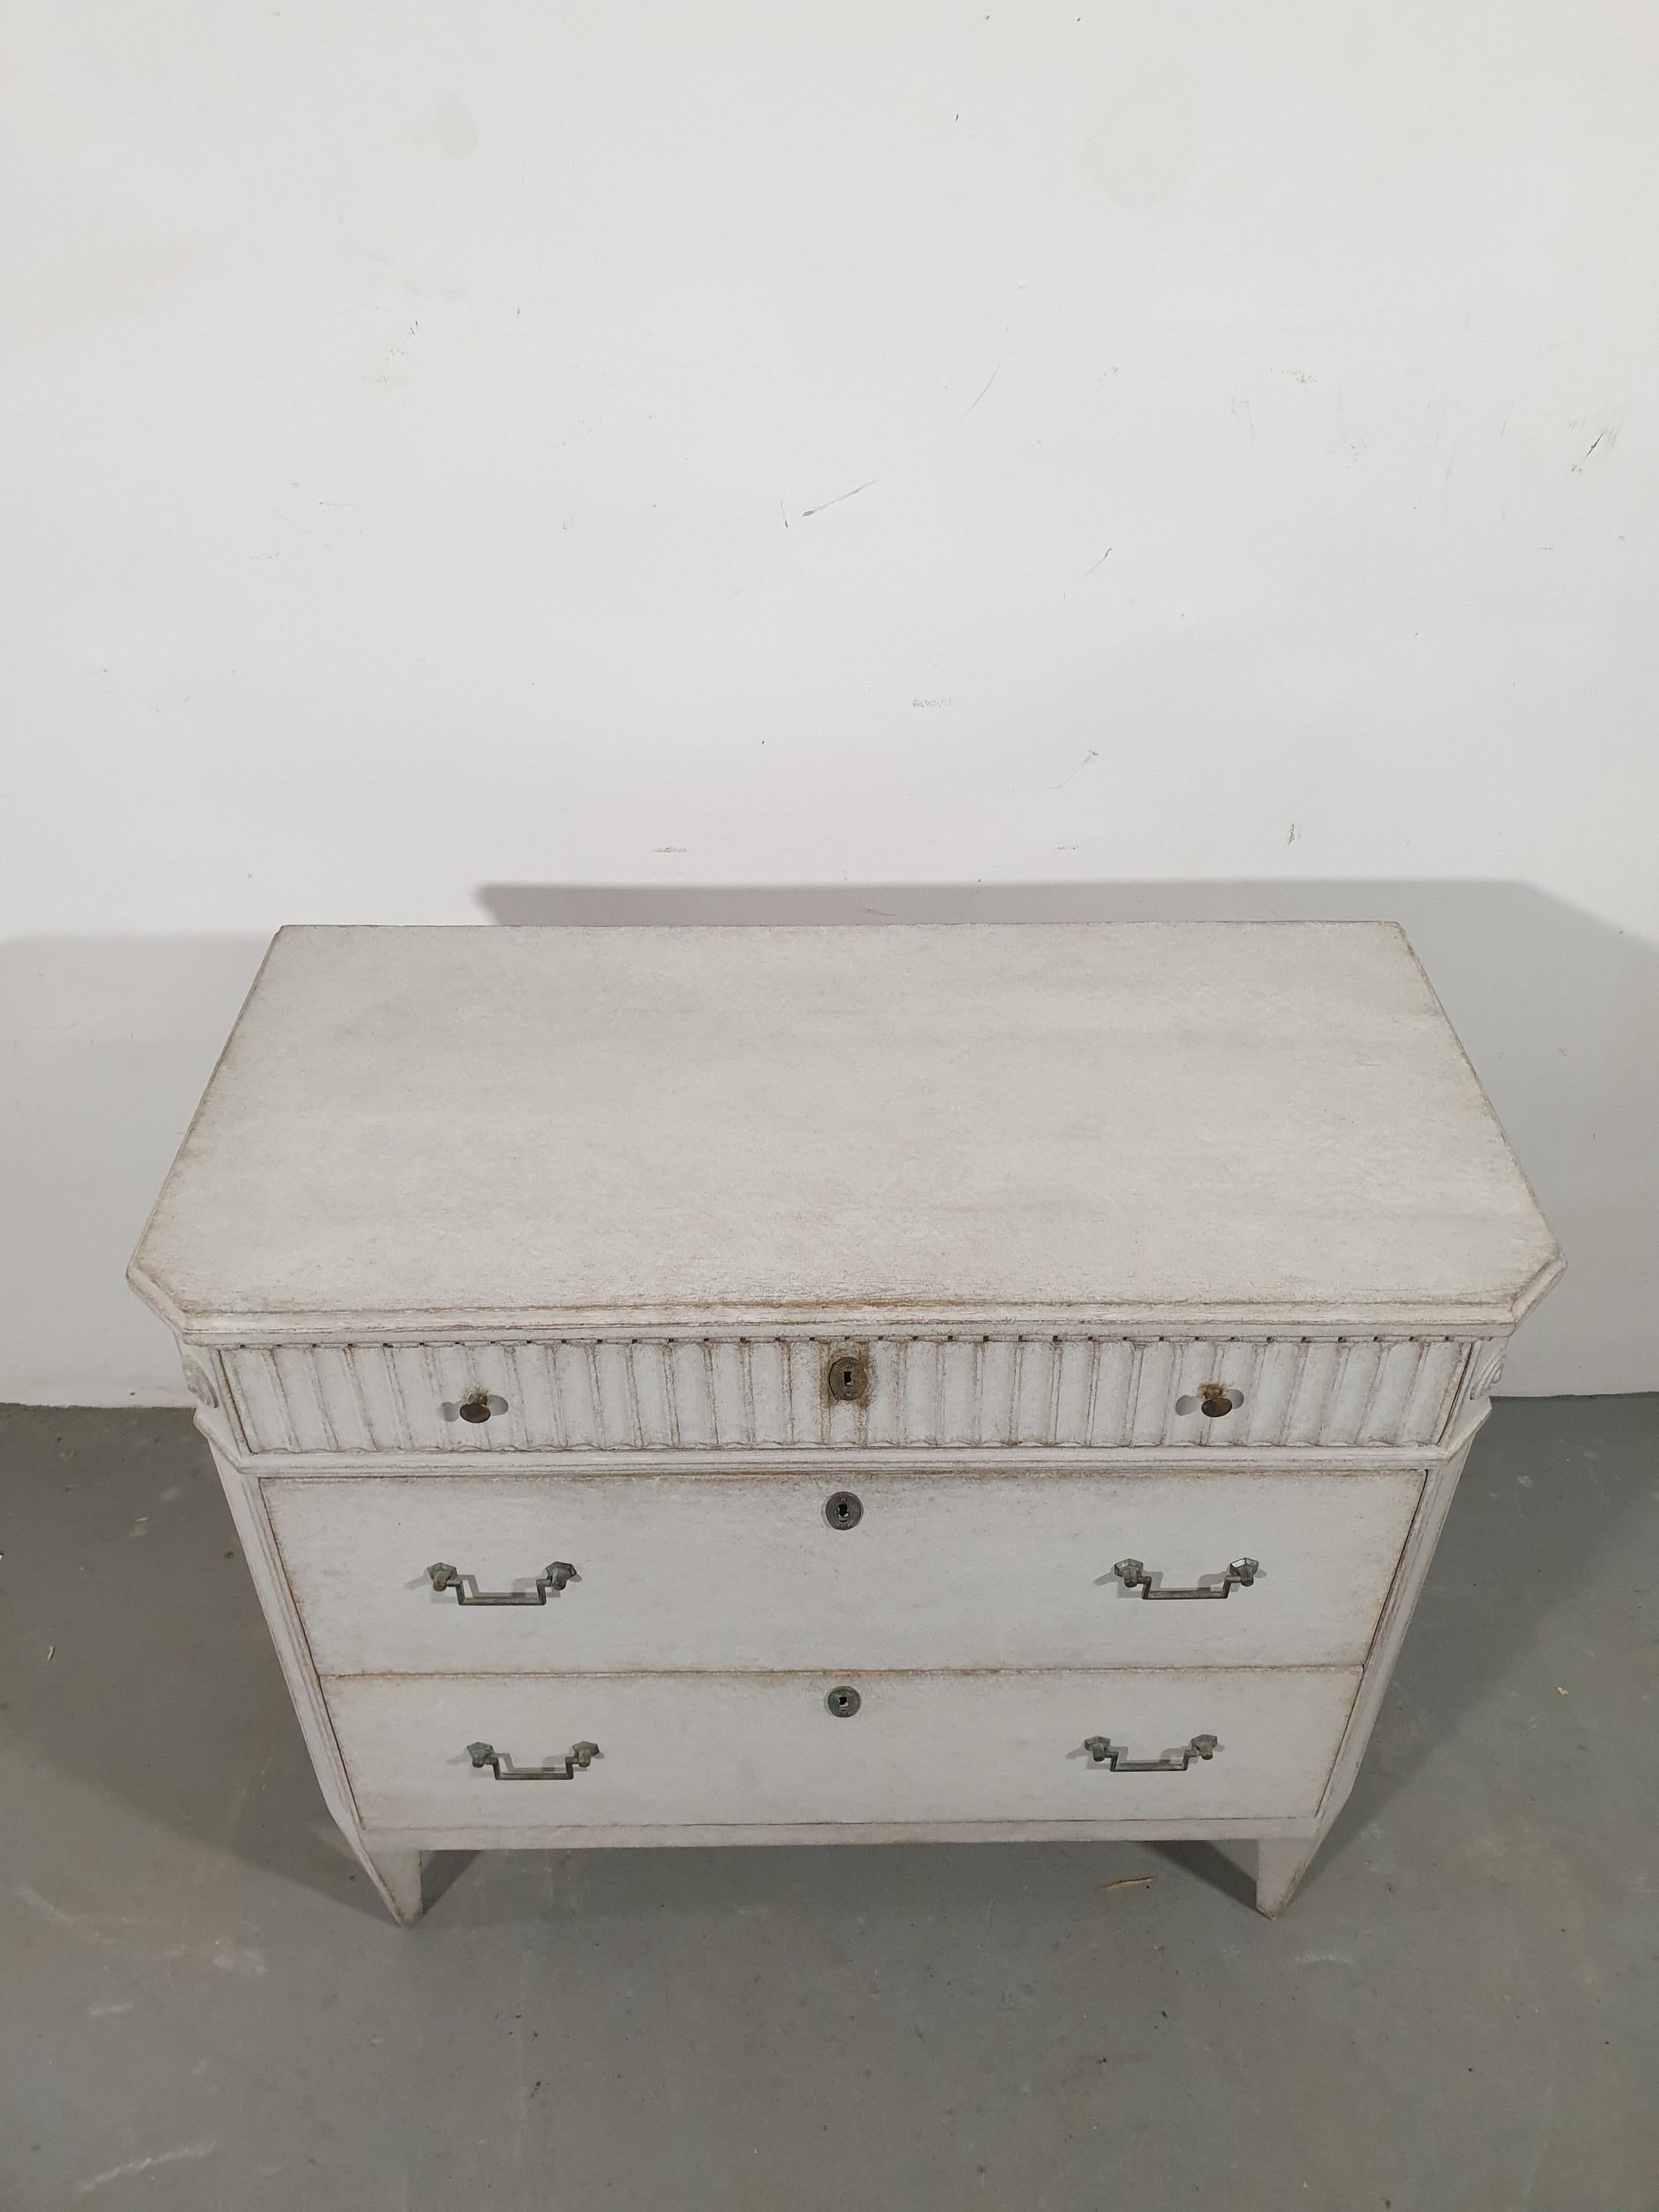 A Swedish Gustavian style chest from circa 1860 with three drawers, light gray painted finish, reeded accents, dentil molding and tapered legs. Embrace the understated elegance of Swedish Gustavian design with this exquisite chest from circa 1860.